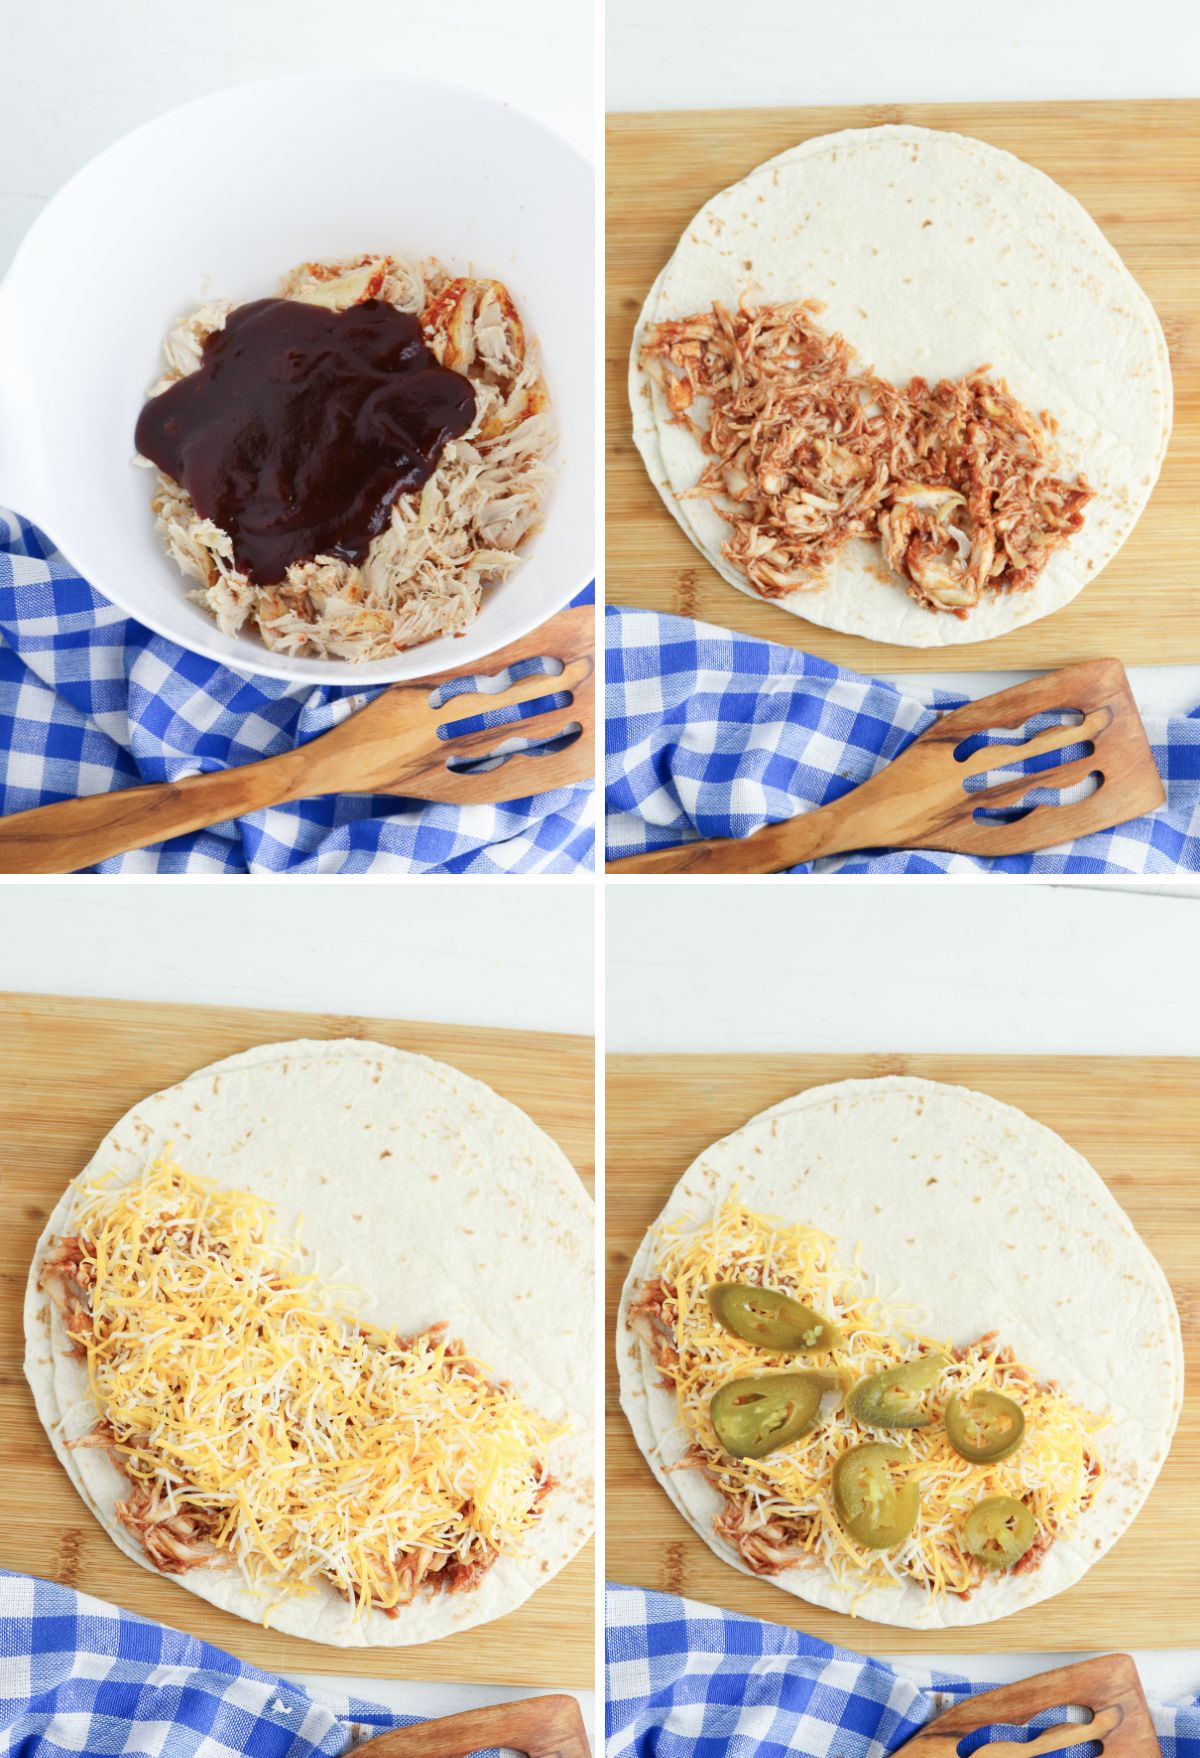 Four-step preparation of a burrito shown from top-down: shredded chicken with sauce in a bowl, spread on a tortilla, topped with cheese, and finished with jalapeños on another tortilla.